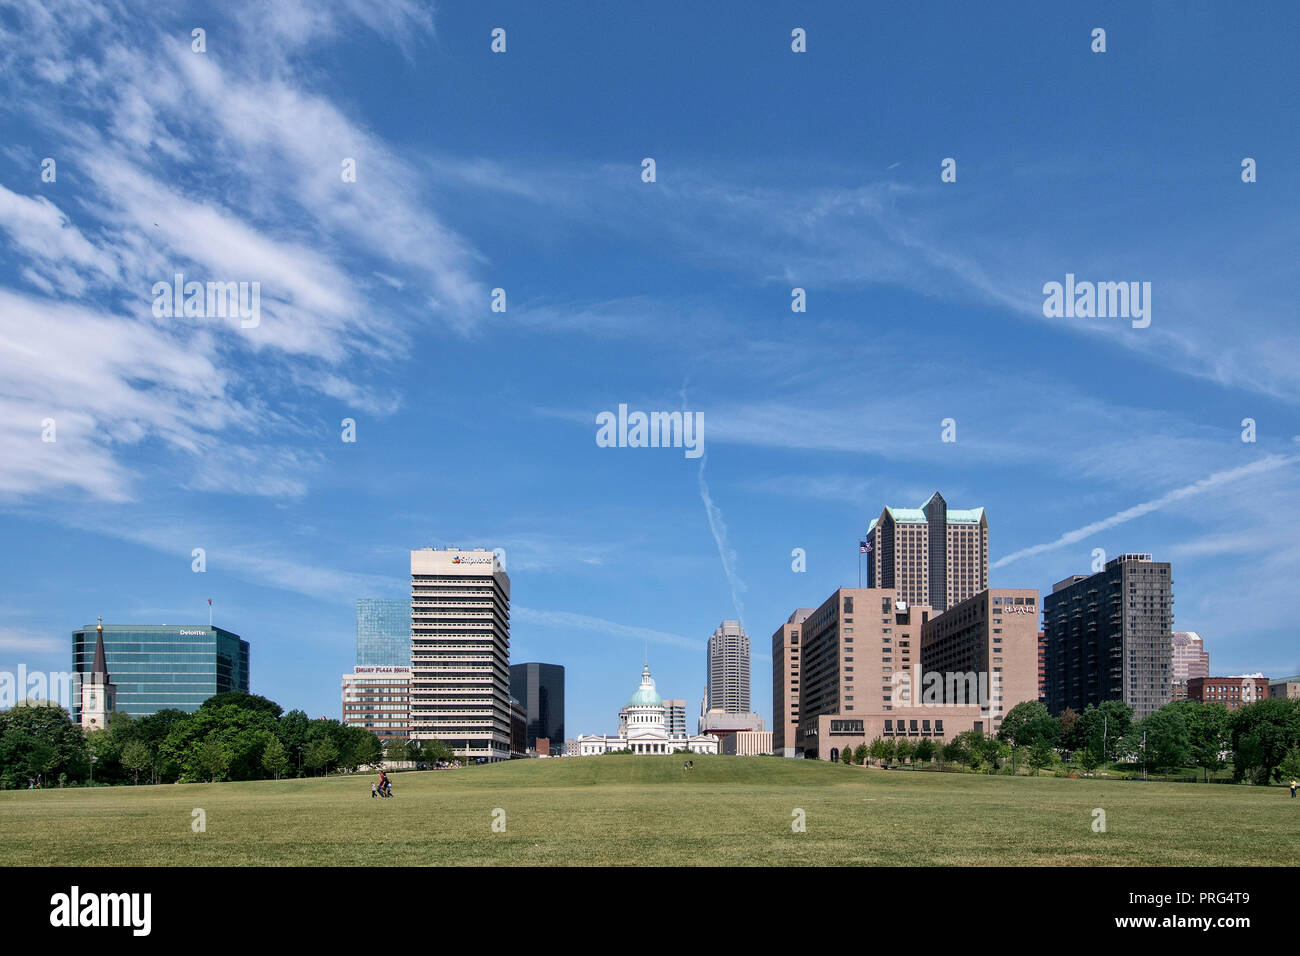 View of downtown with the historic Old Courthouse, downtown St. Louis, Missouri, USA Stock Photo